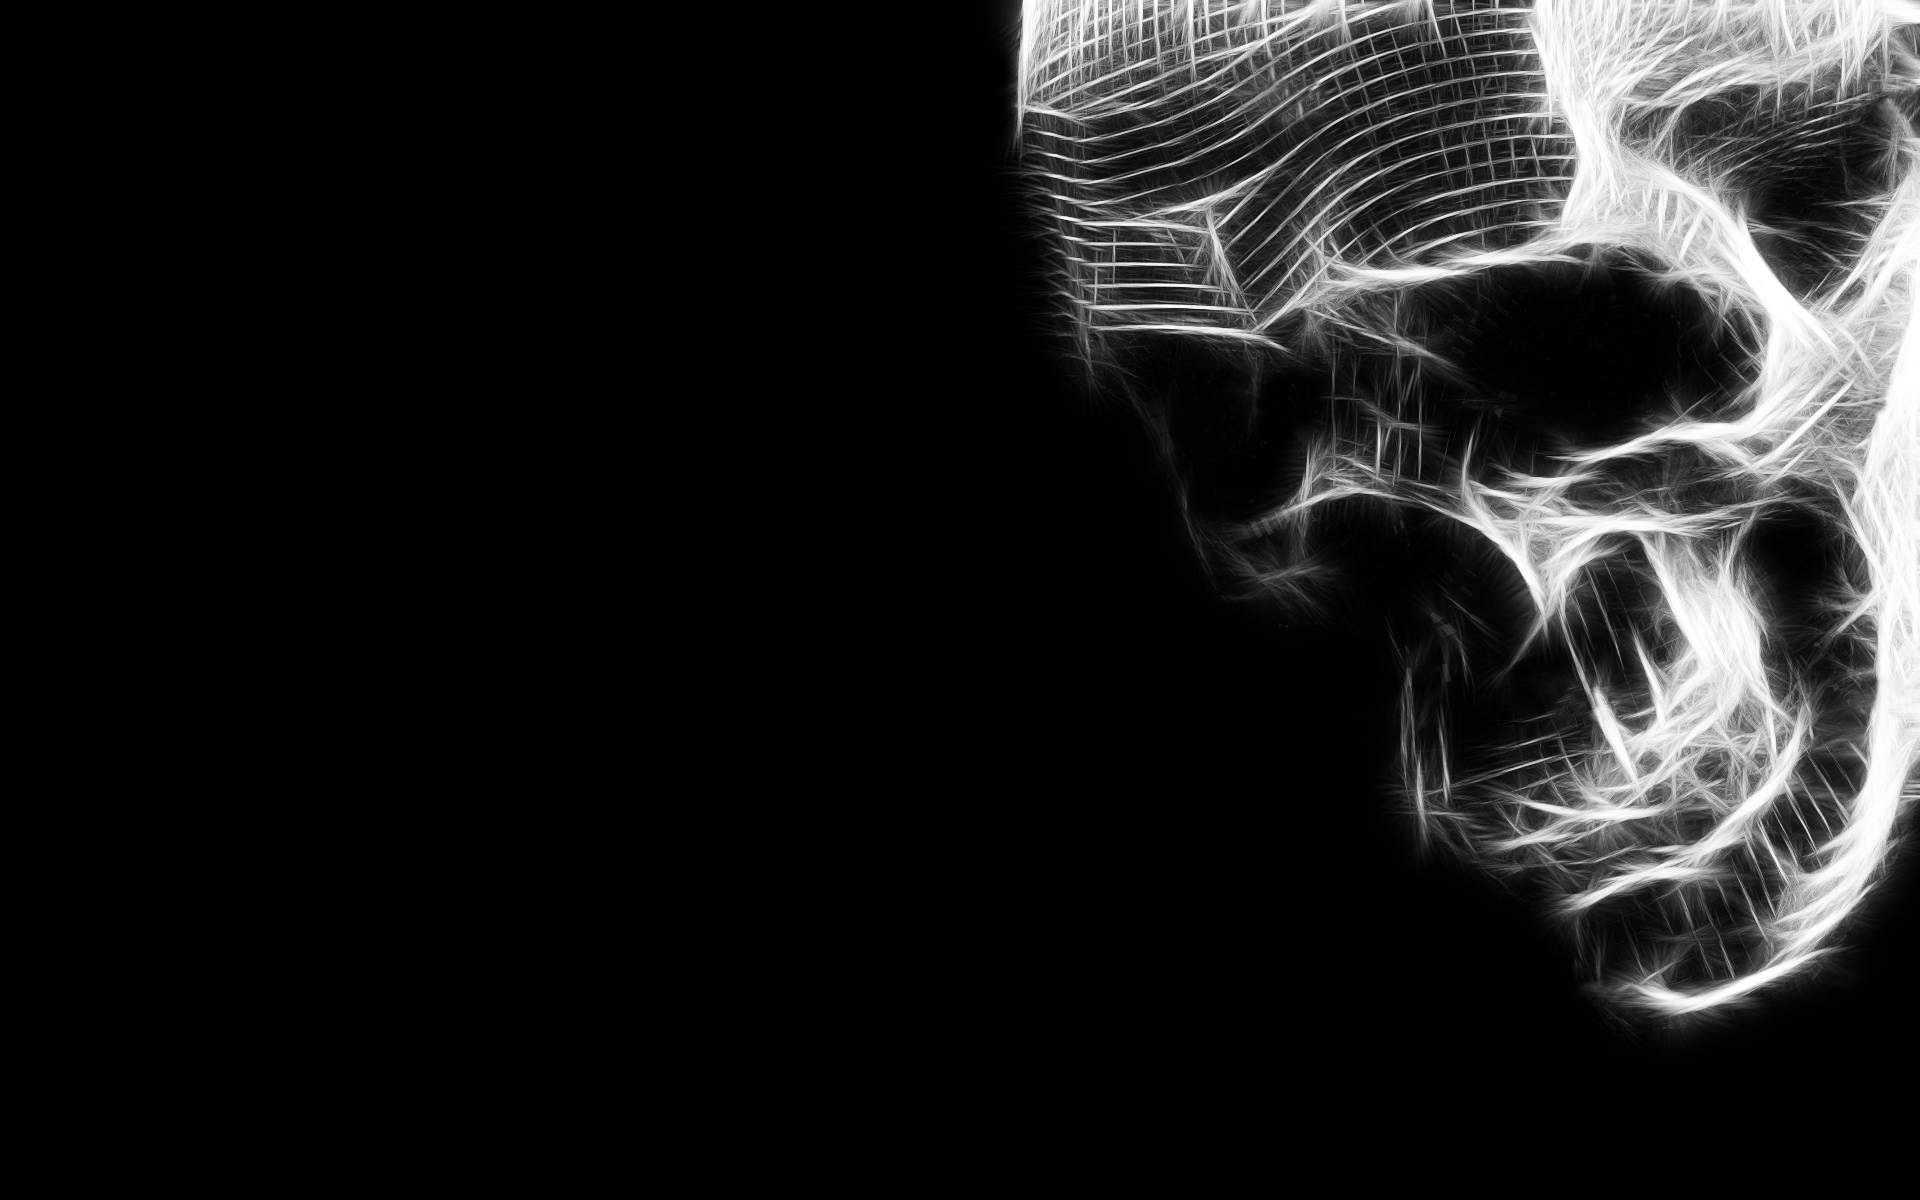 Cool Skull Wallpaper Wallpapers, Backgrounds, Images, Art Photos